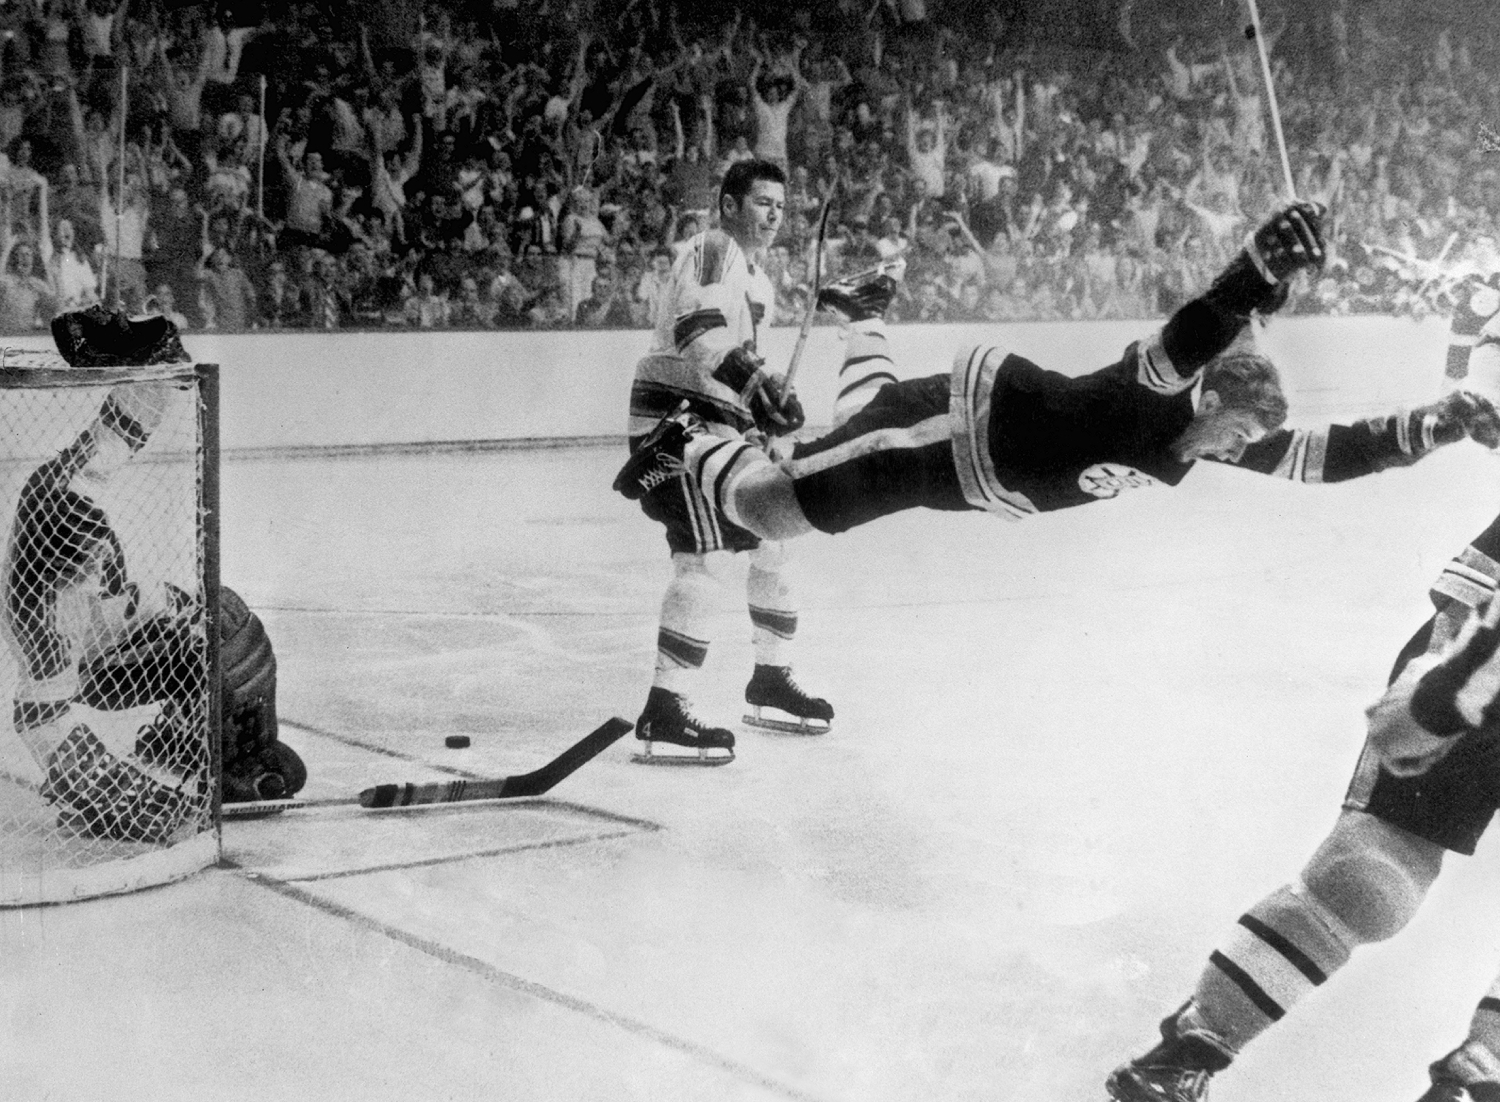 Bobby Orr said he wants to be a "teammate" of Donald Trump.